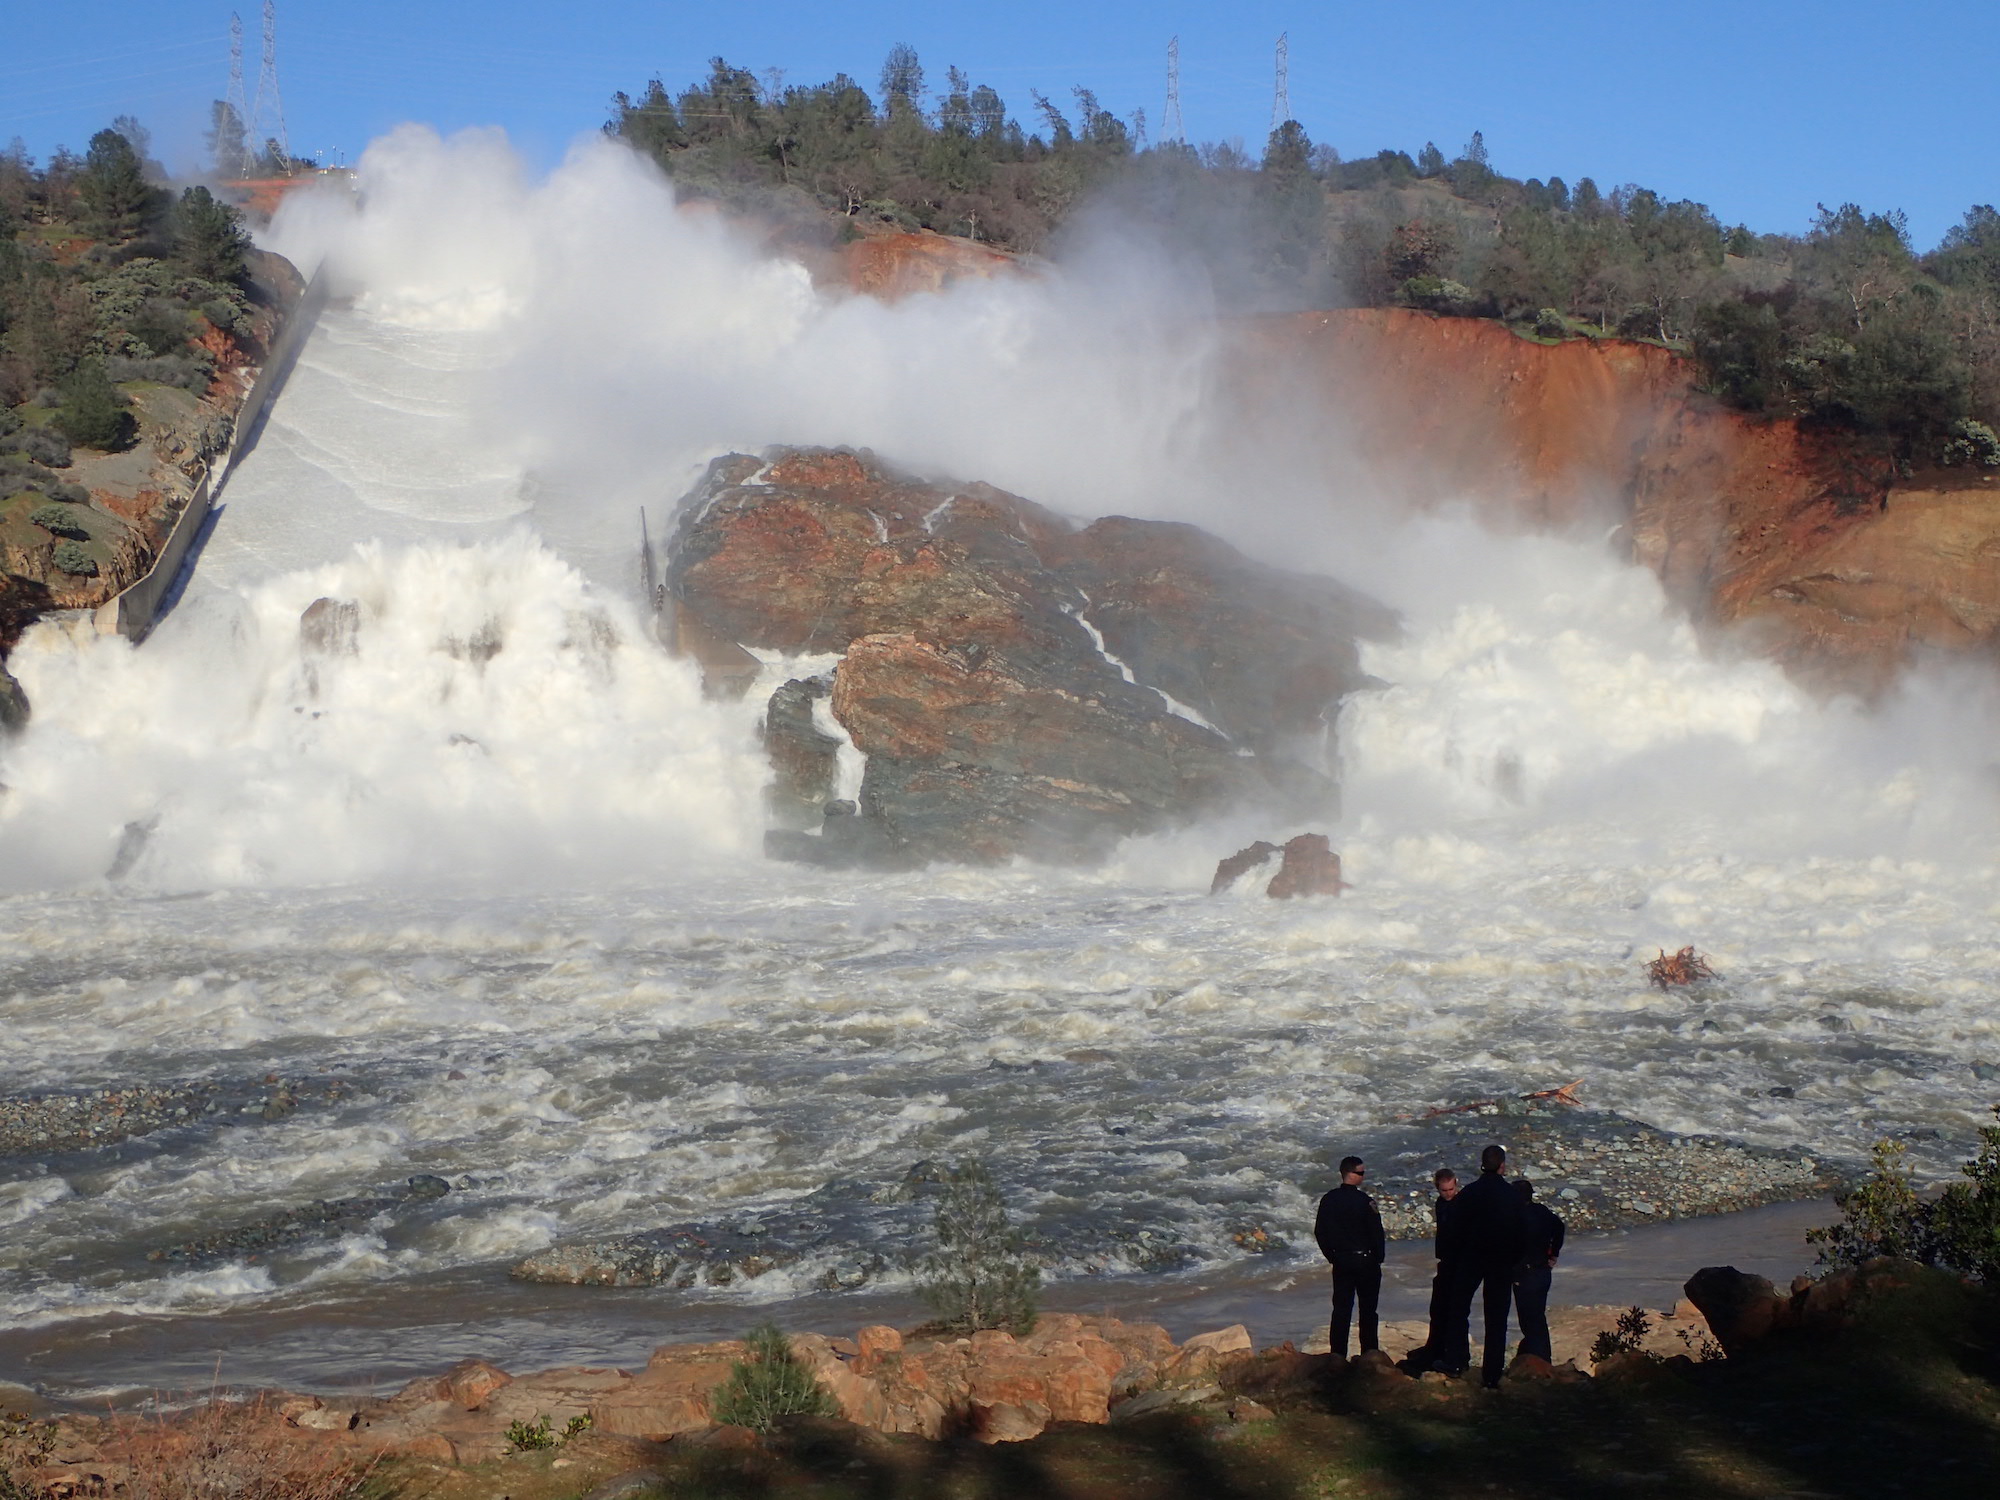 A Cal Fire crew watches as water roars down Oroville's main spillway at 100,000 cubic-ft. per second.